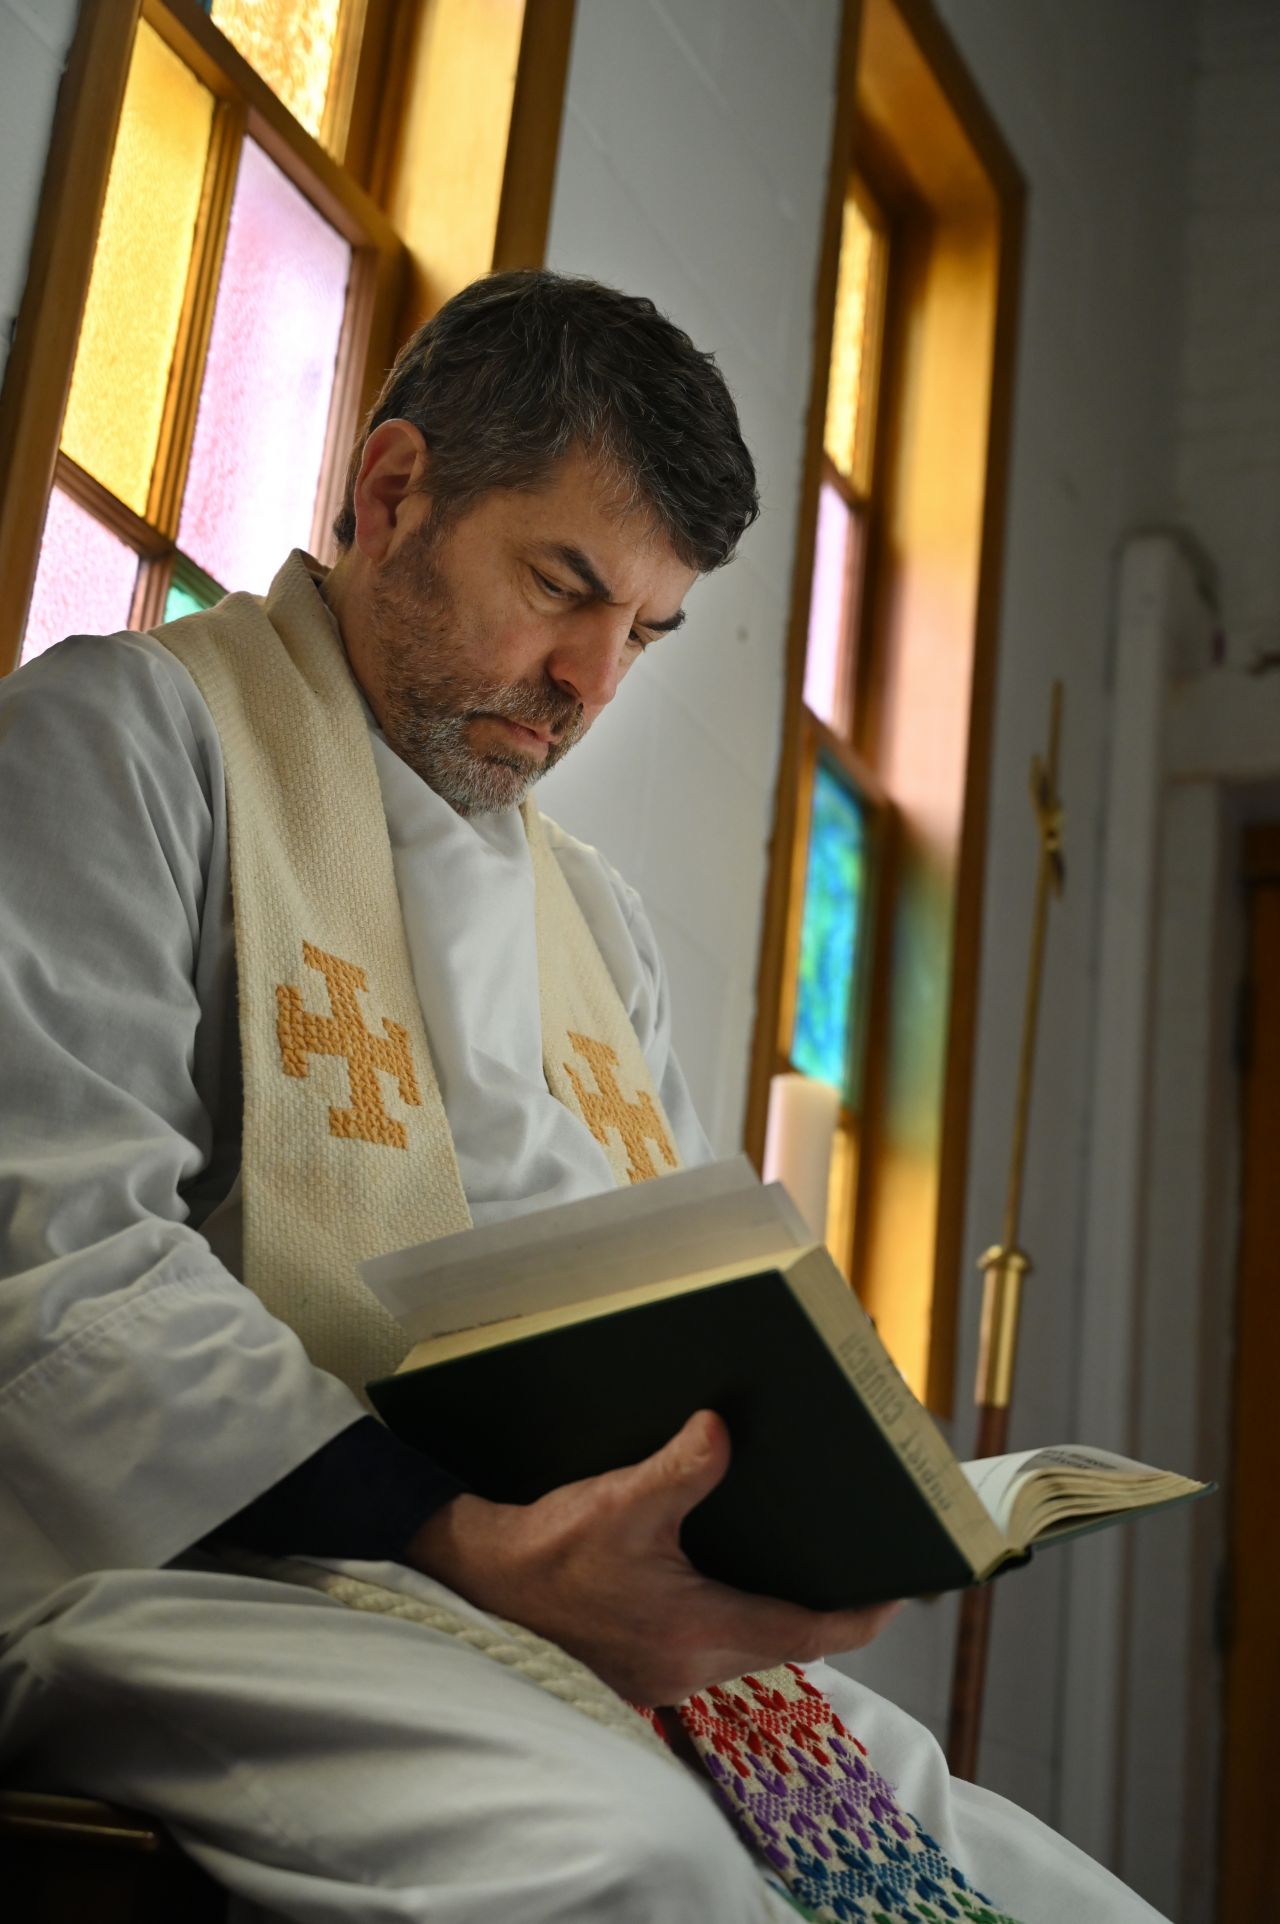 A dark haired man sits alone in front of a stained-glass window and reads the Bible.